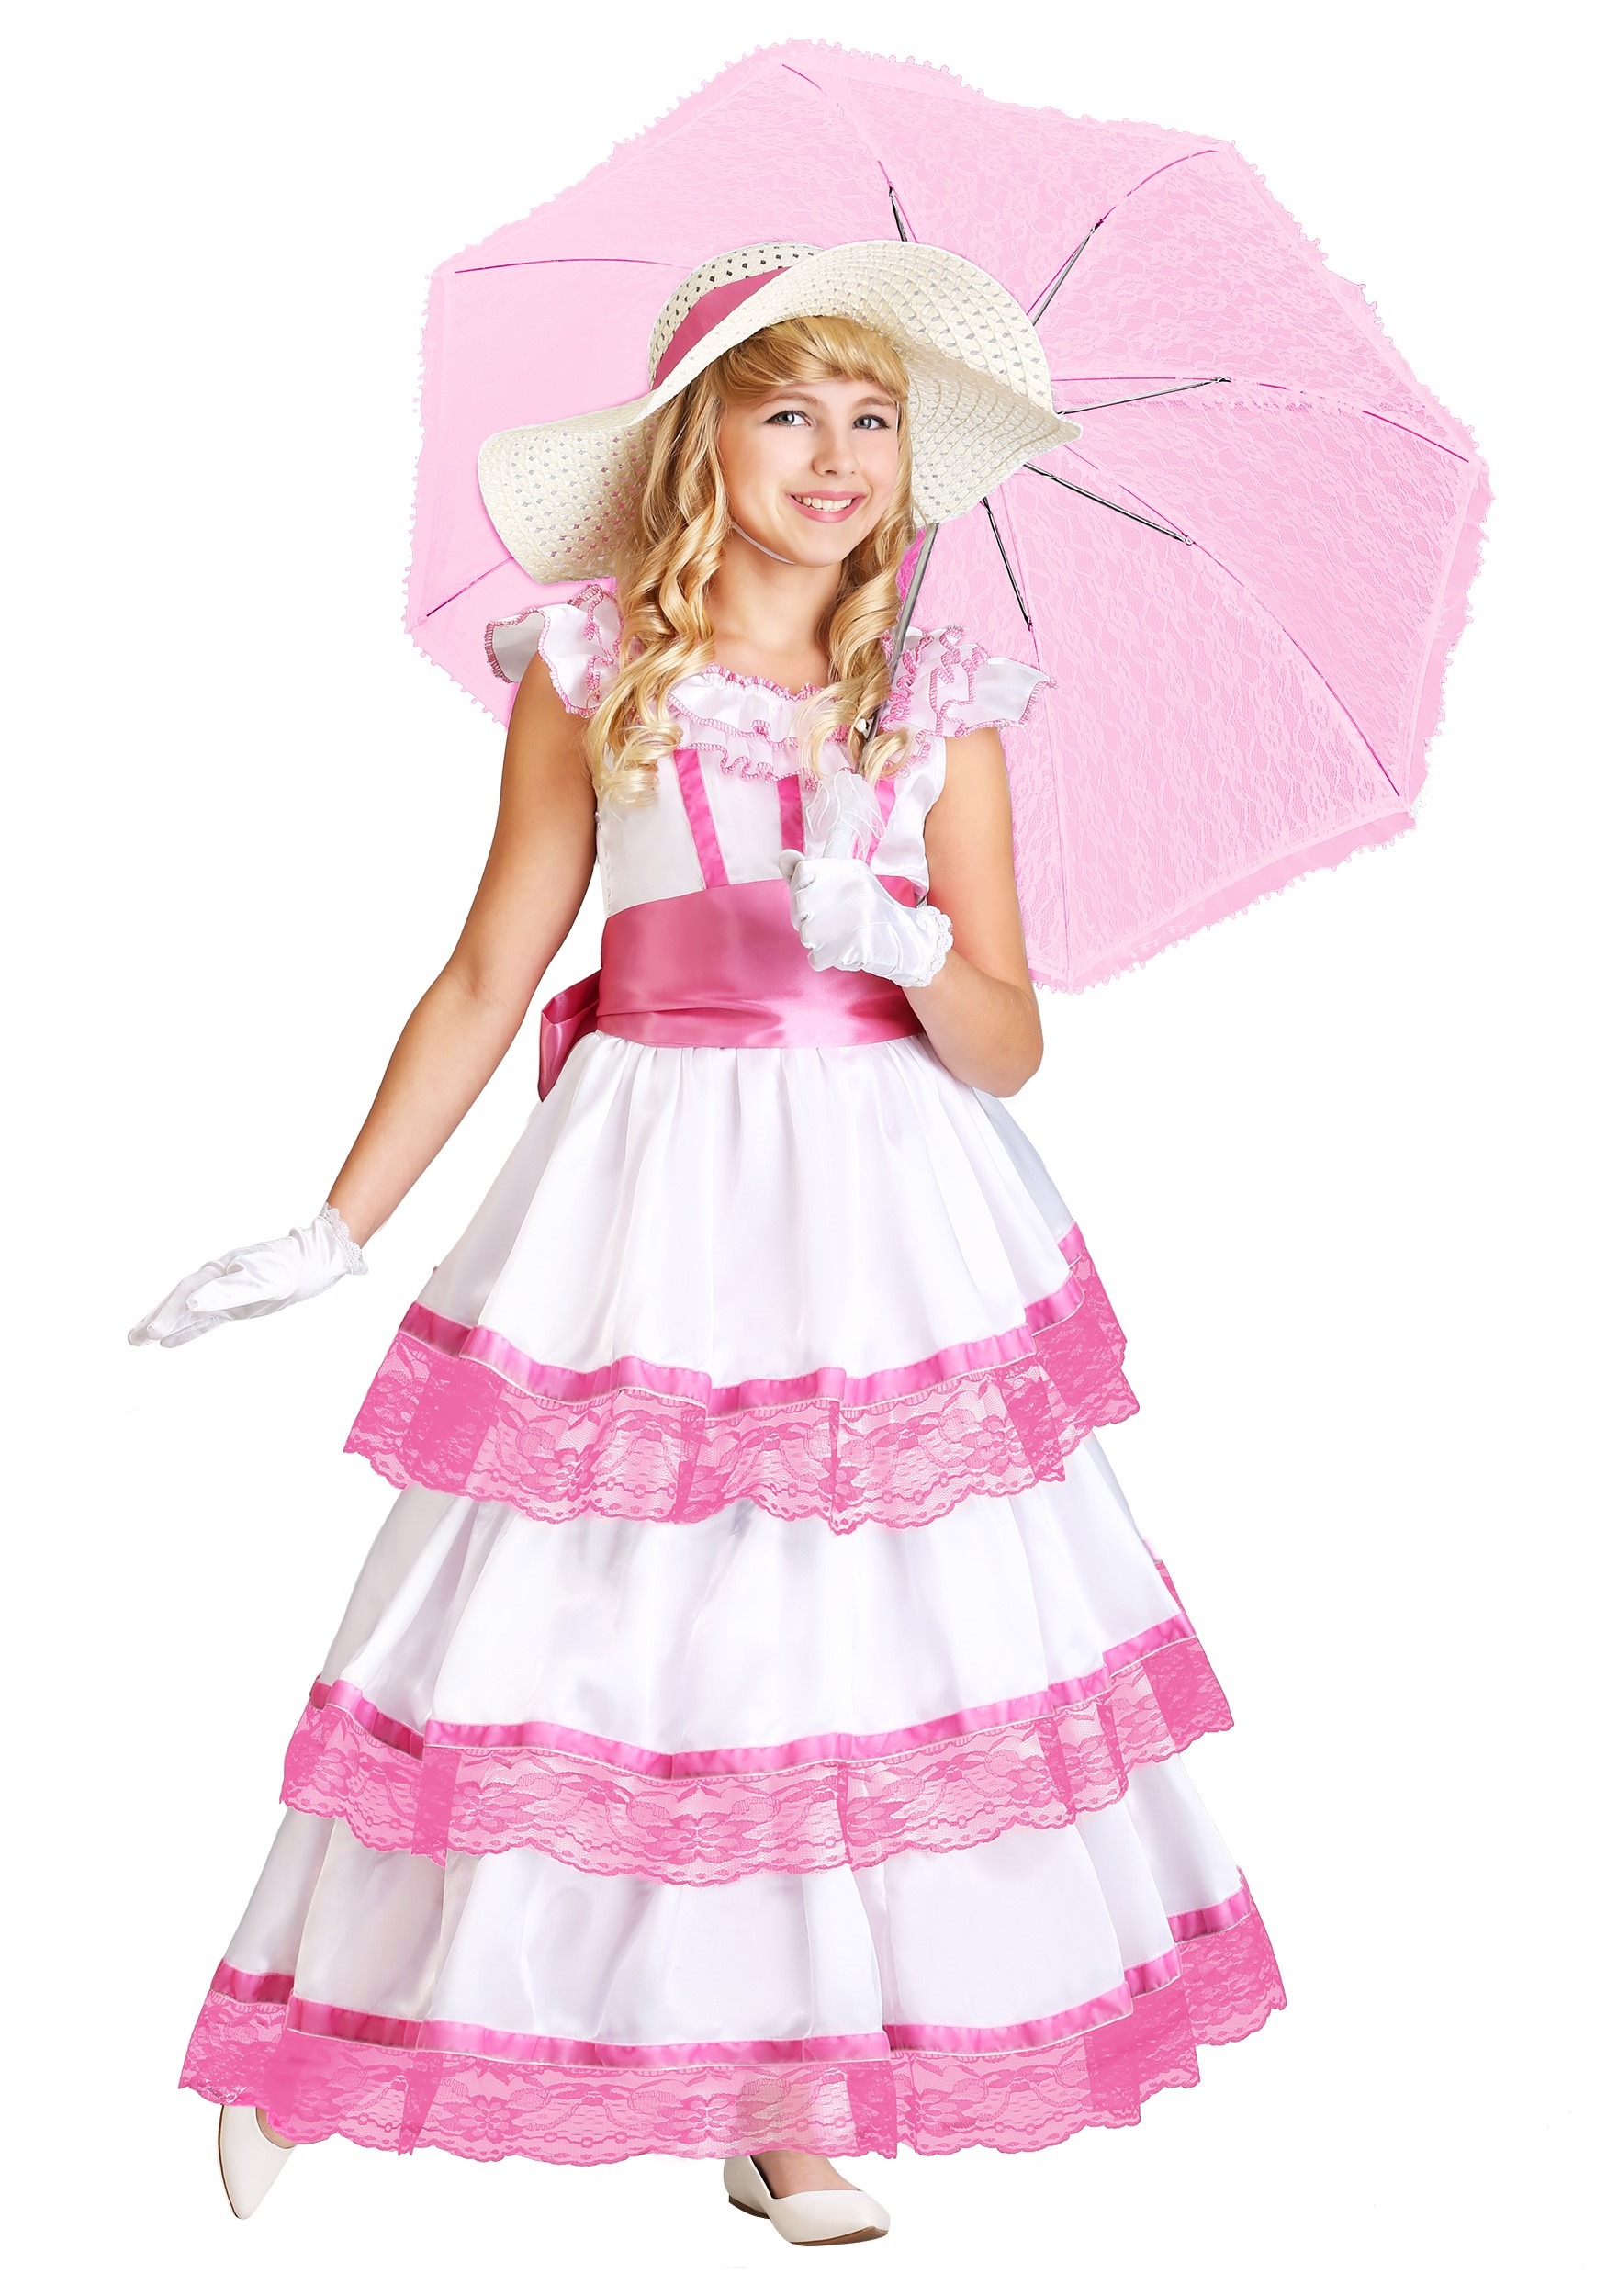 Sweet Southern Belle Girls Costume